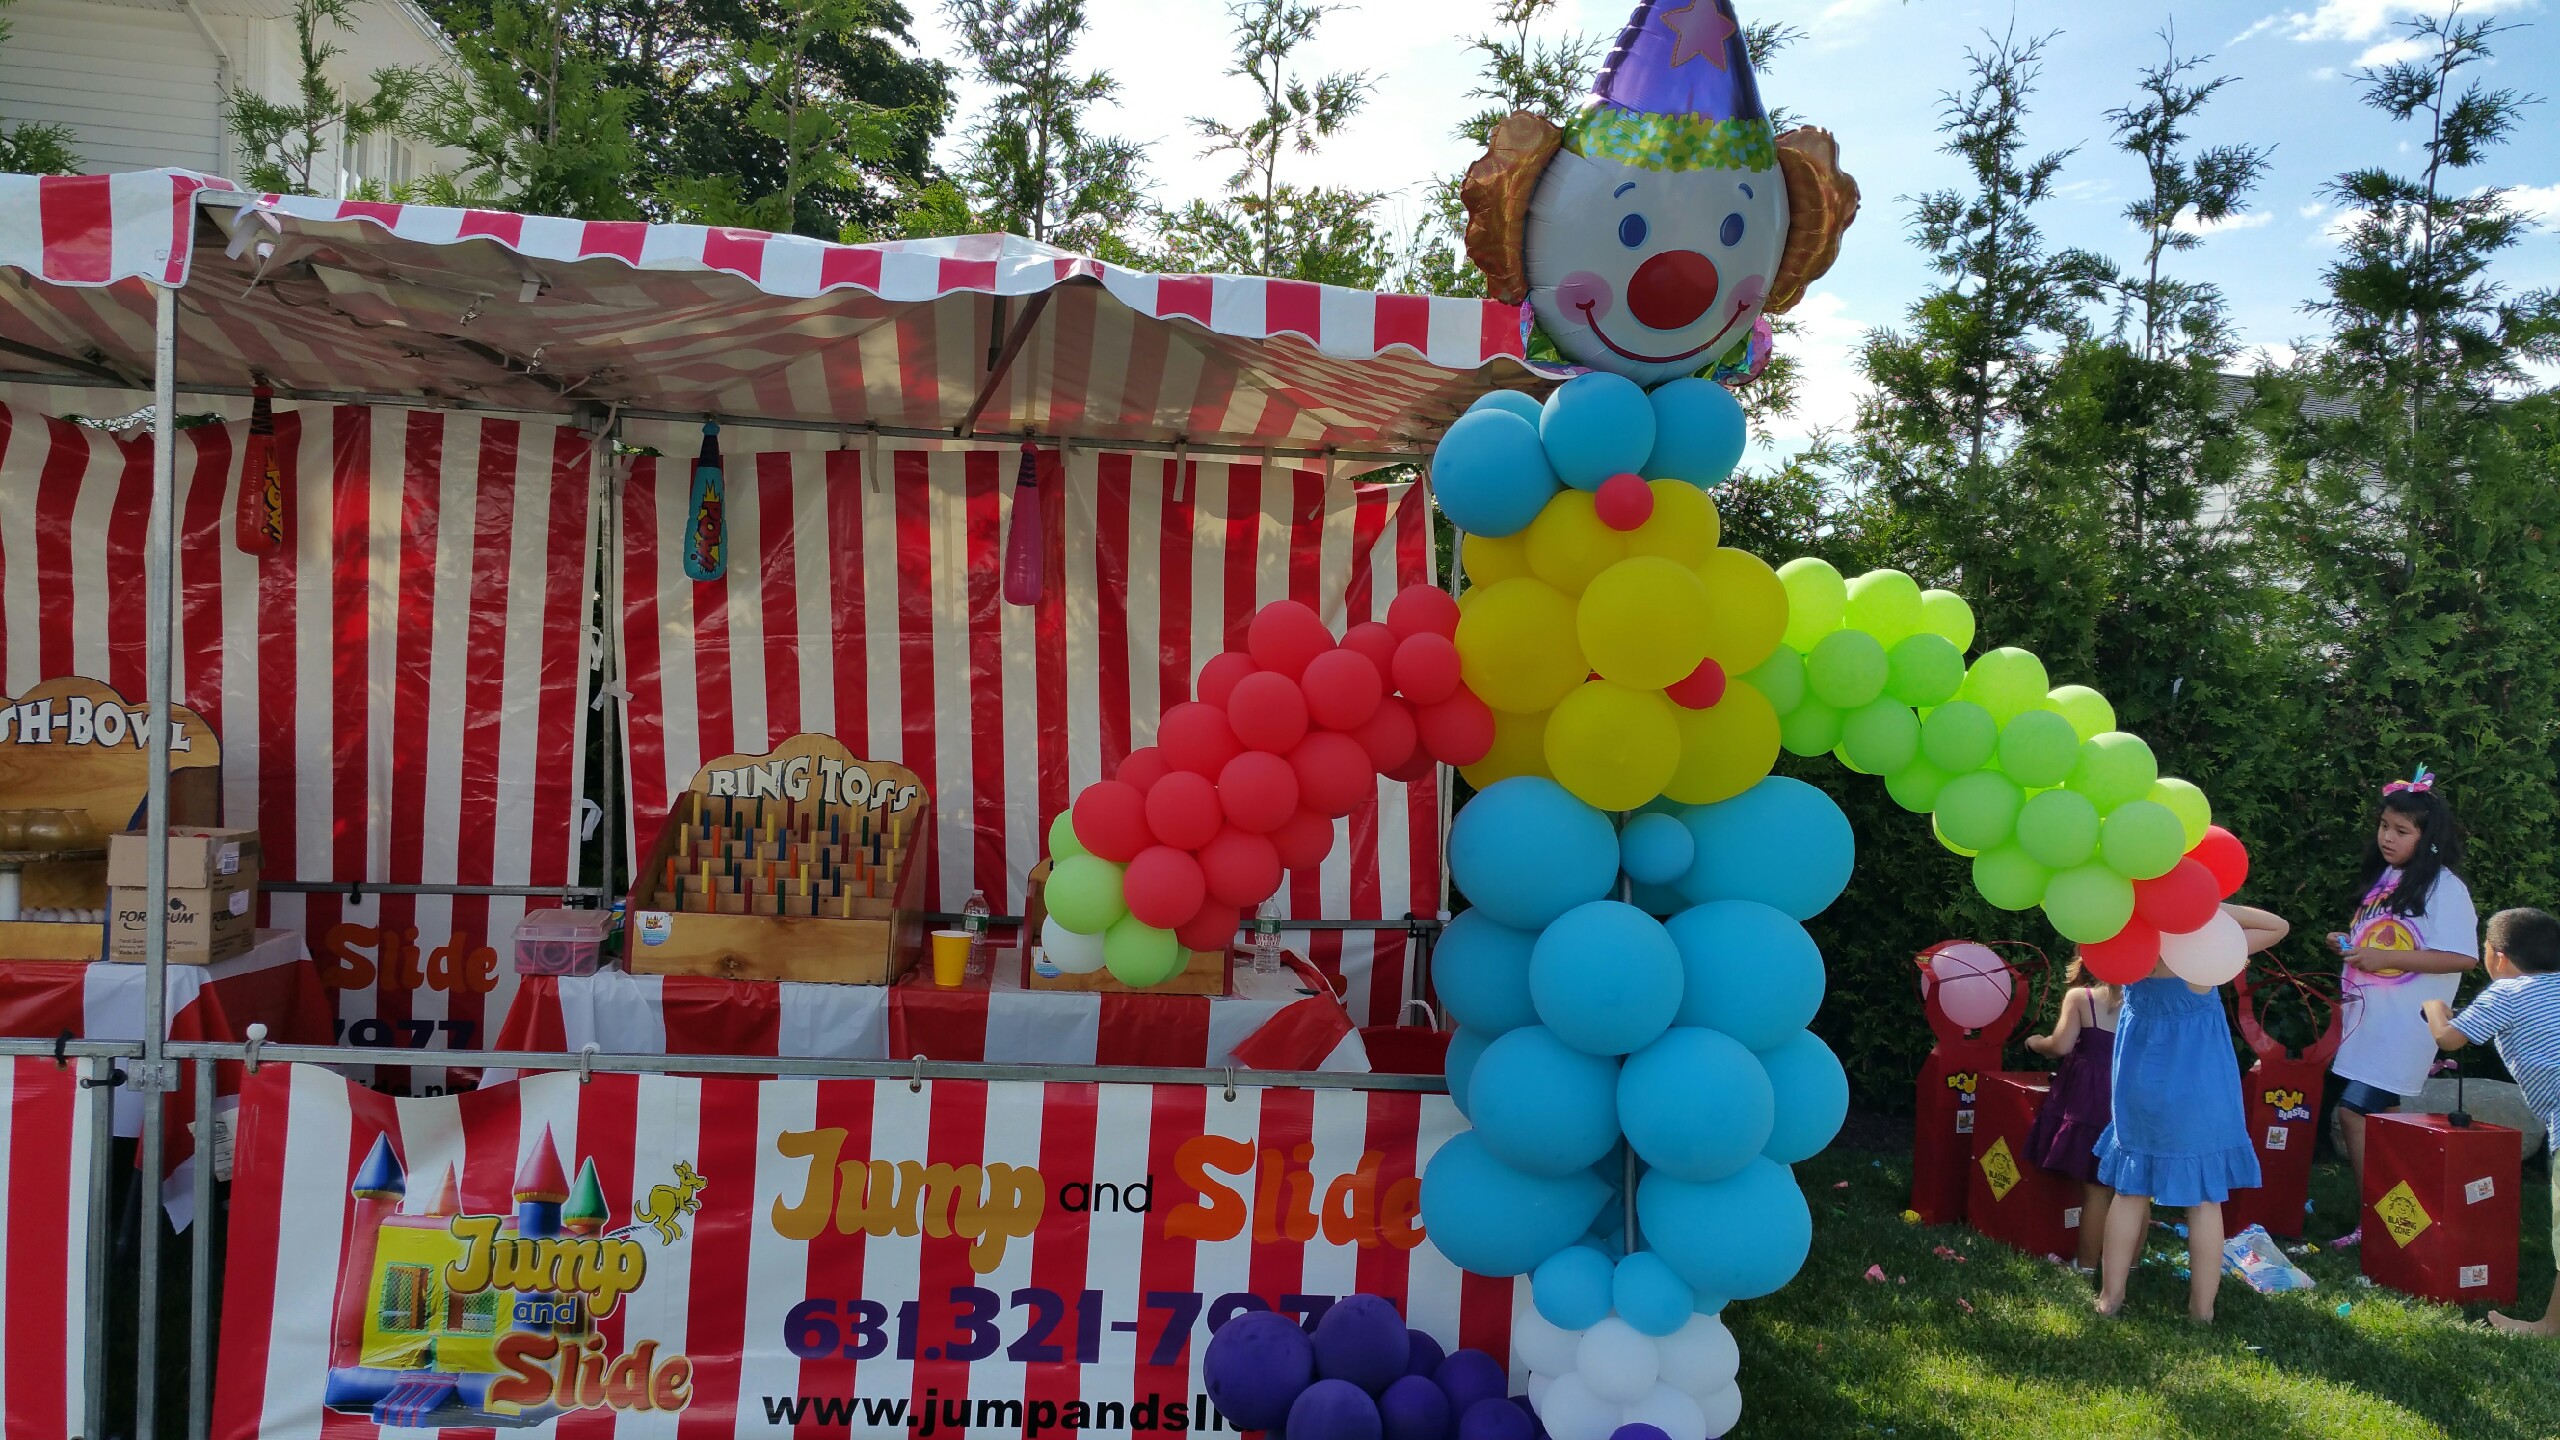 Carnival parties from backyard to open and public carnivals and street fair rentals.
Jump And Slide can provide enough entertainment from 10 guests to over 10,000 guests.
You supply the people...We supply the fun.......